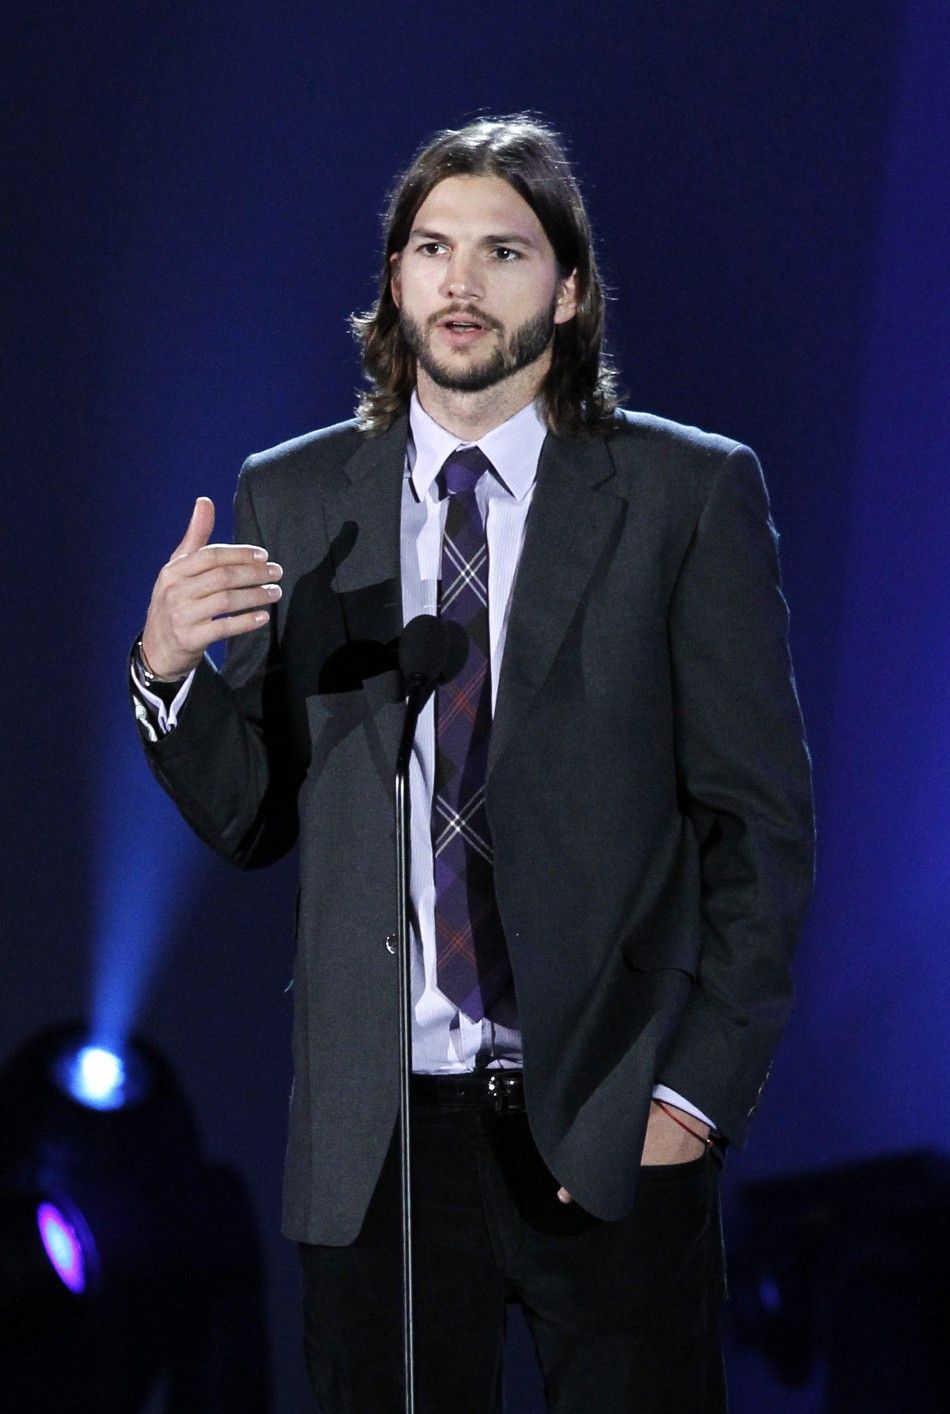 Actor Ashton Kutcher speaks during quotA Decade of Difference A Concert Celebrating 10 Years of the William J. Clinton Foundationquot at the Hollywood Bowl in Hollywood, California 